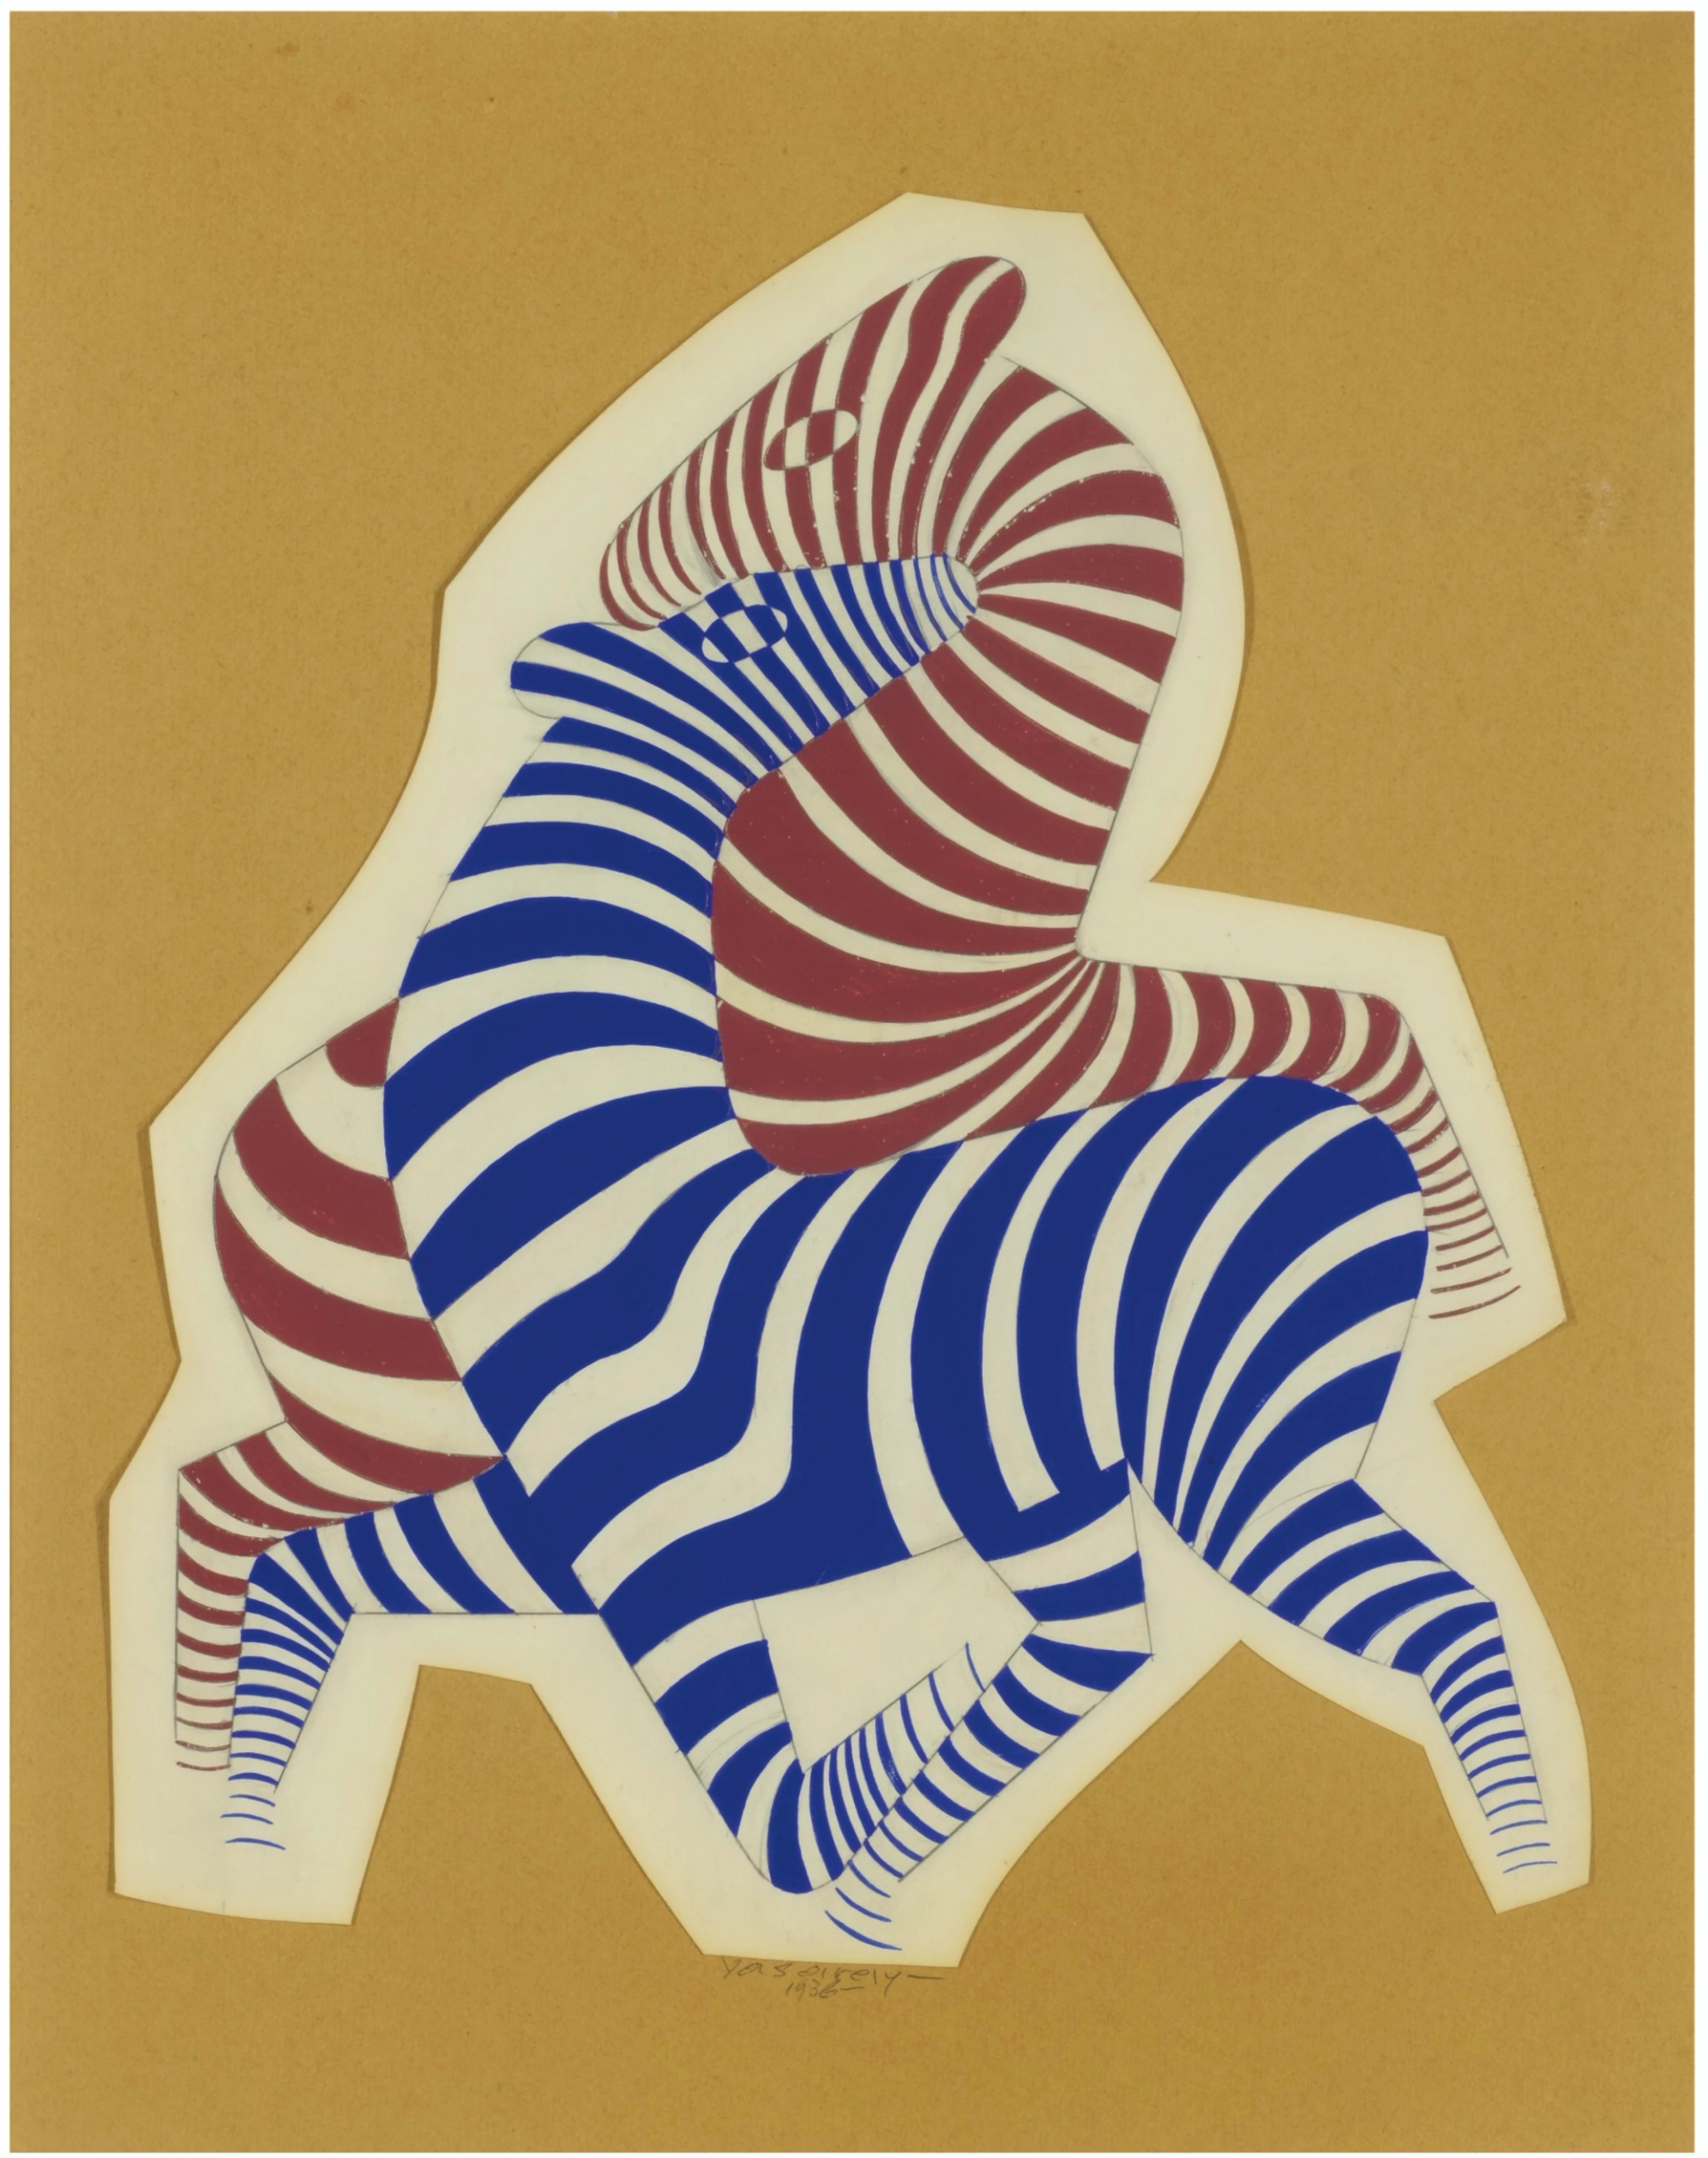 Two zebras, one with blue stripes and the other with red, are intertwined at the neck, creating an optical effect with their patterned stripes against a faded yellow background.